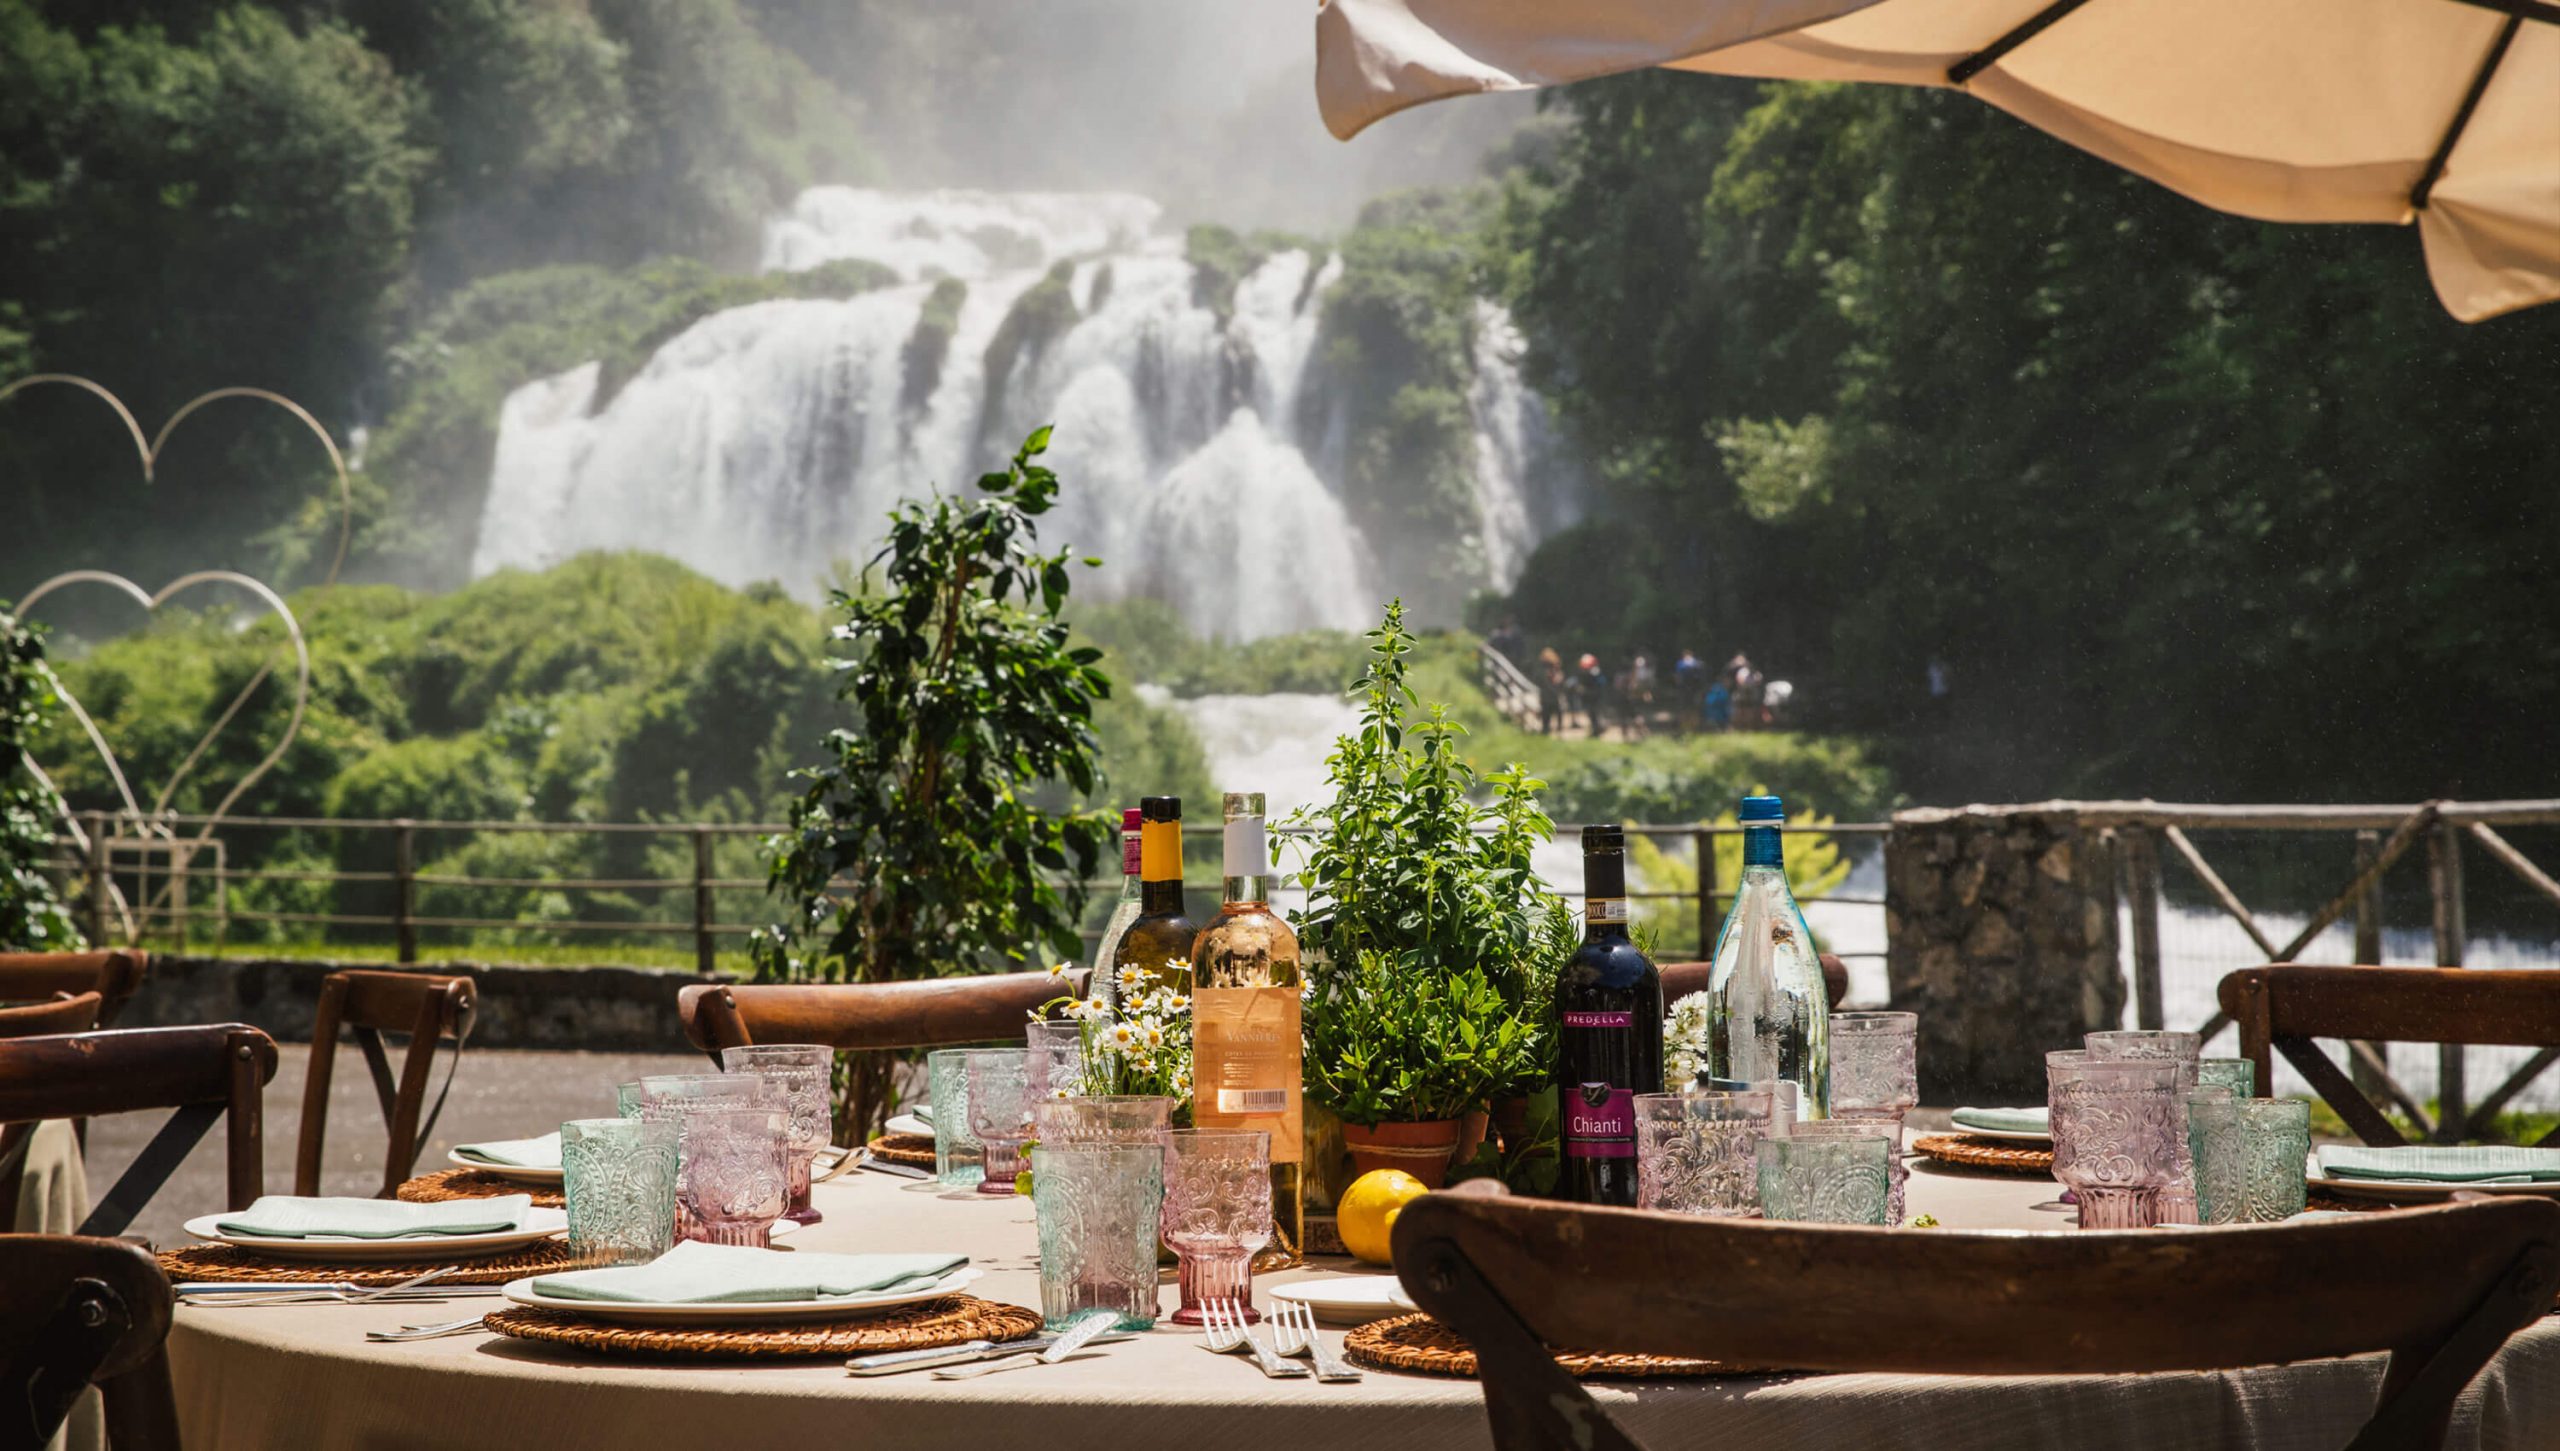 Table set for lunch outside near a waterfall in Tuscany